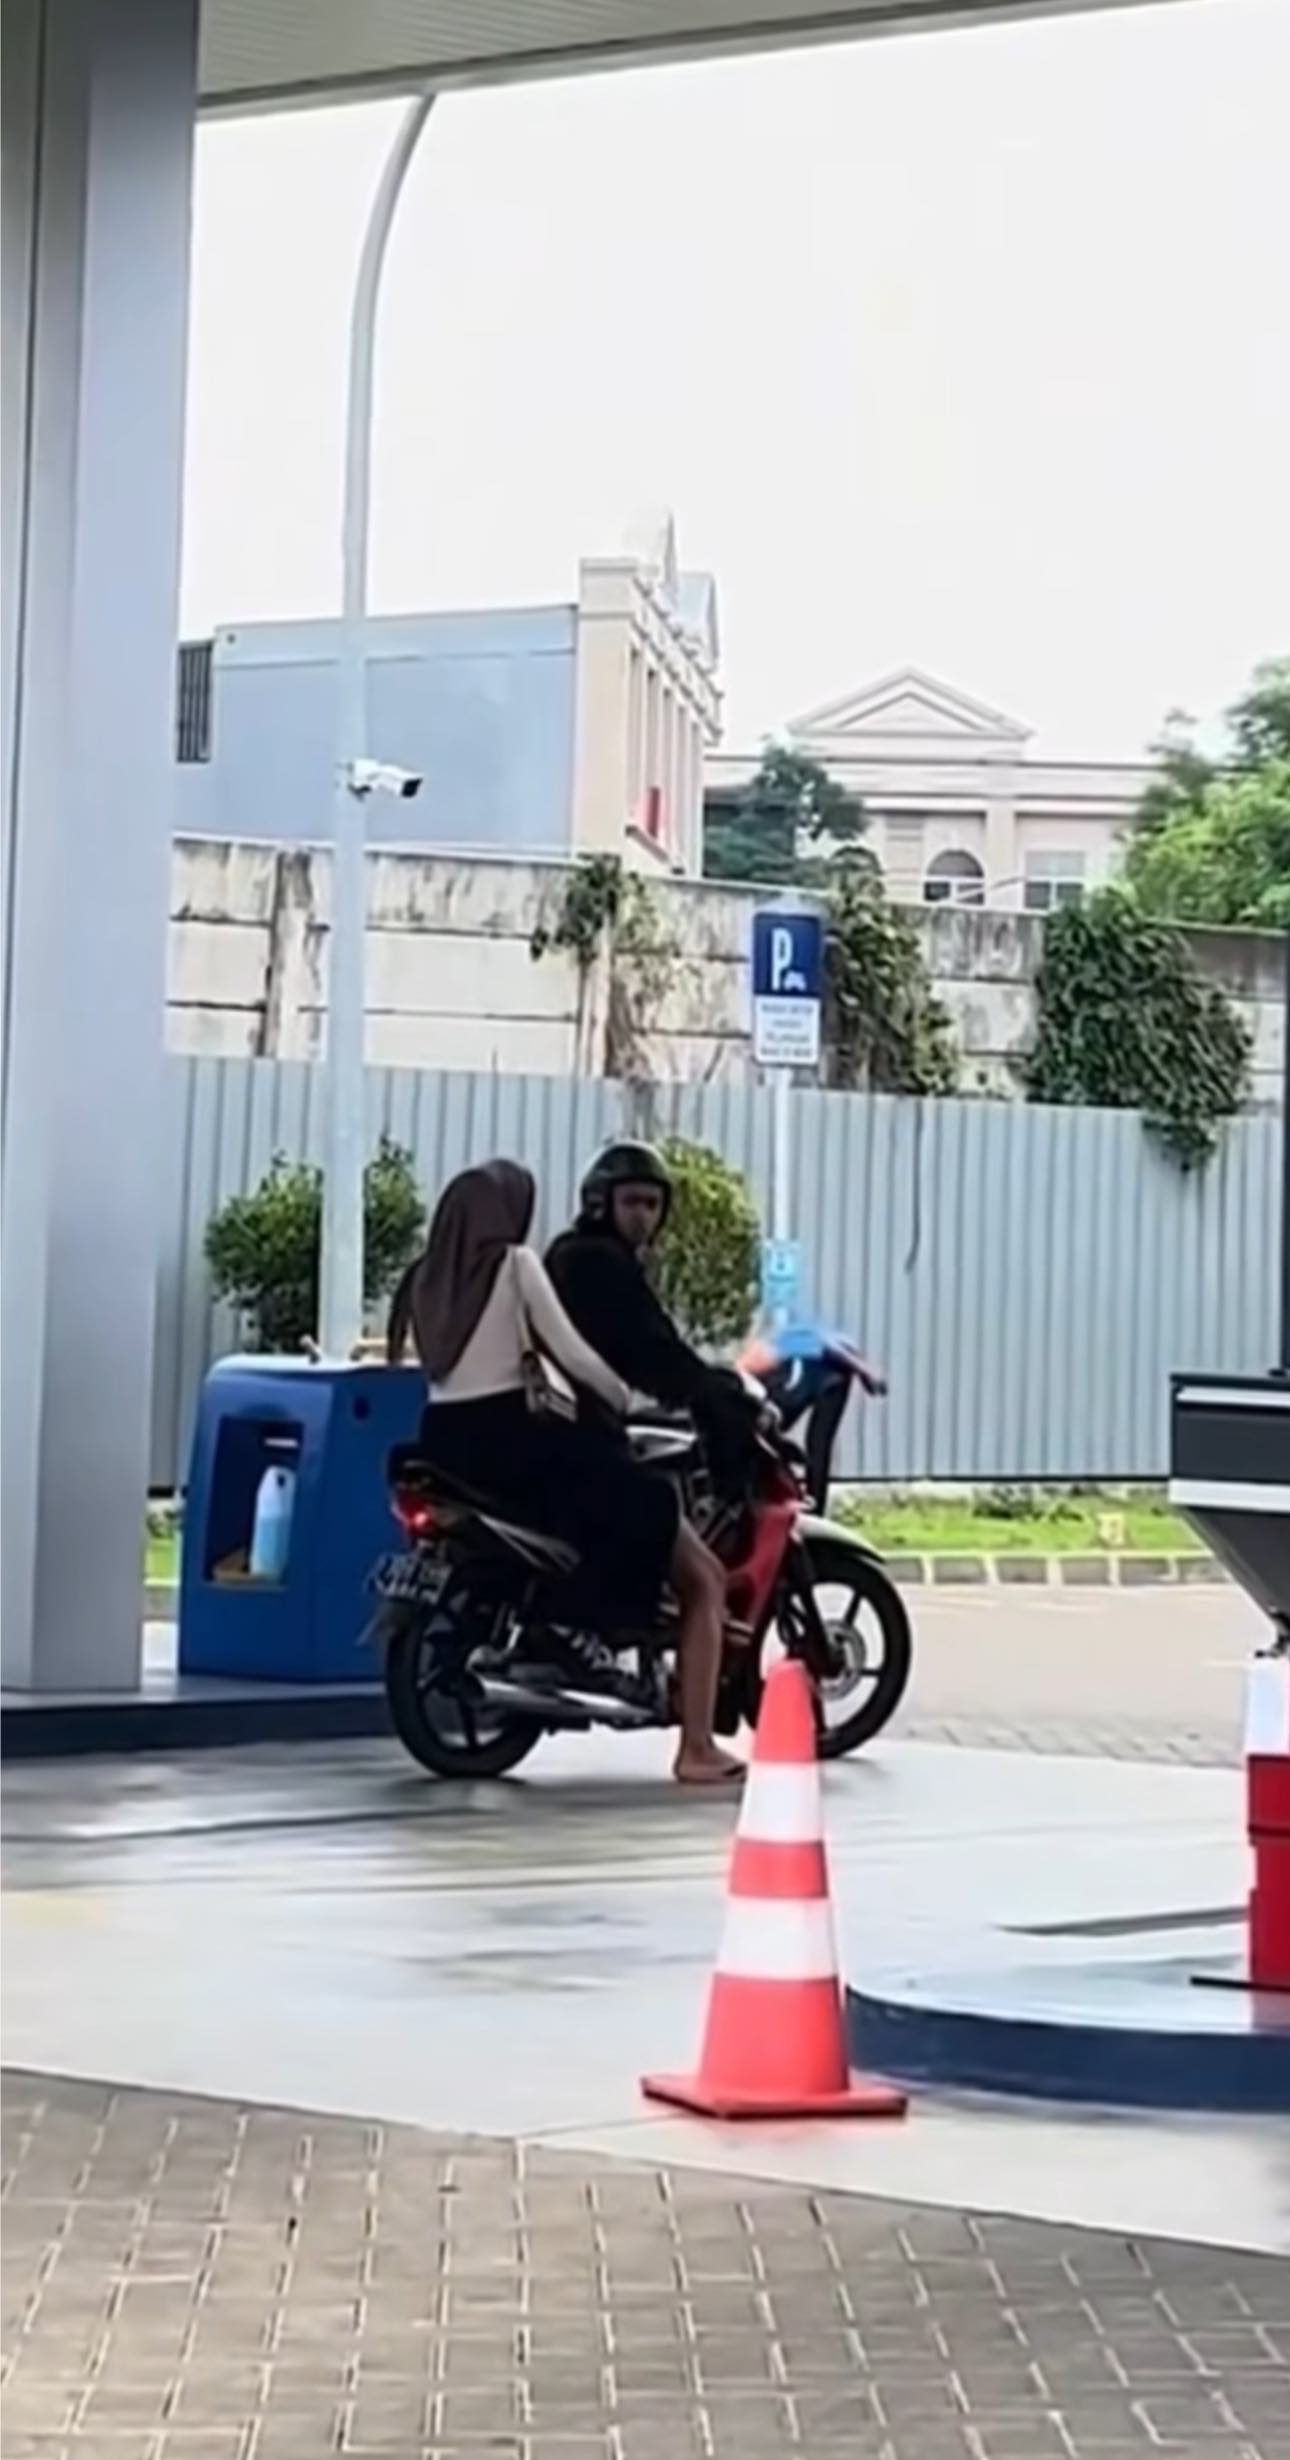 Man annoyed after her partner sat on a different man's bike